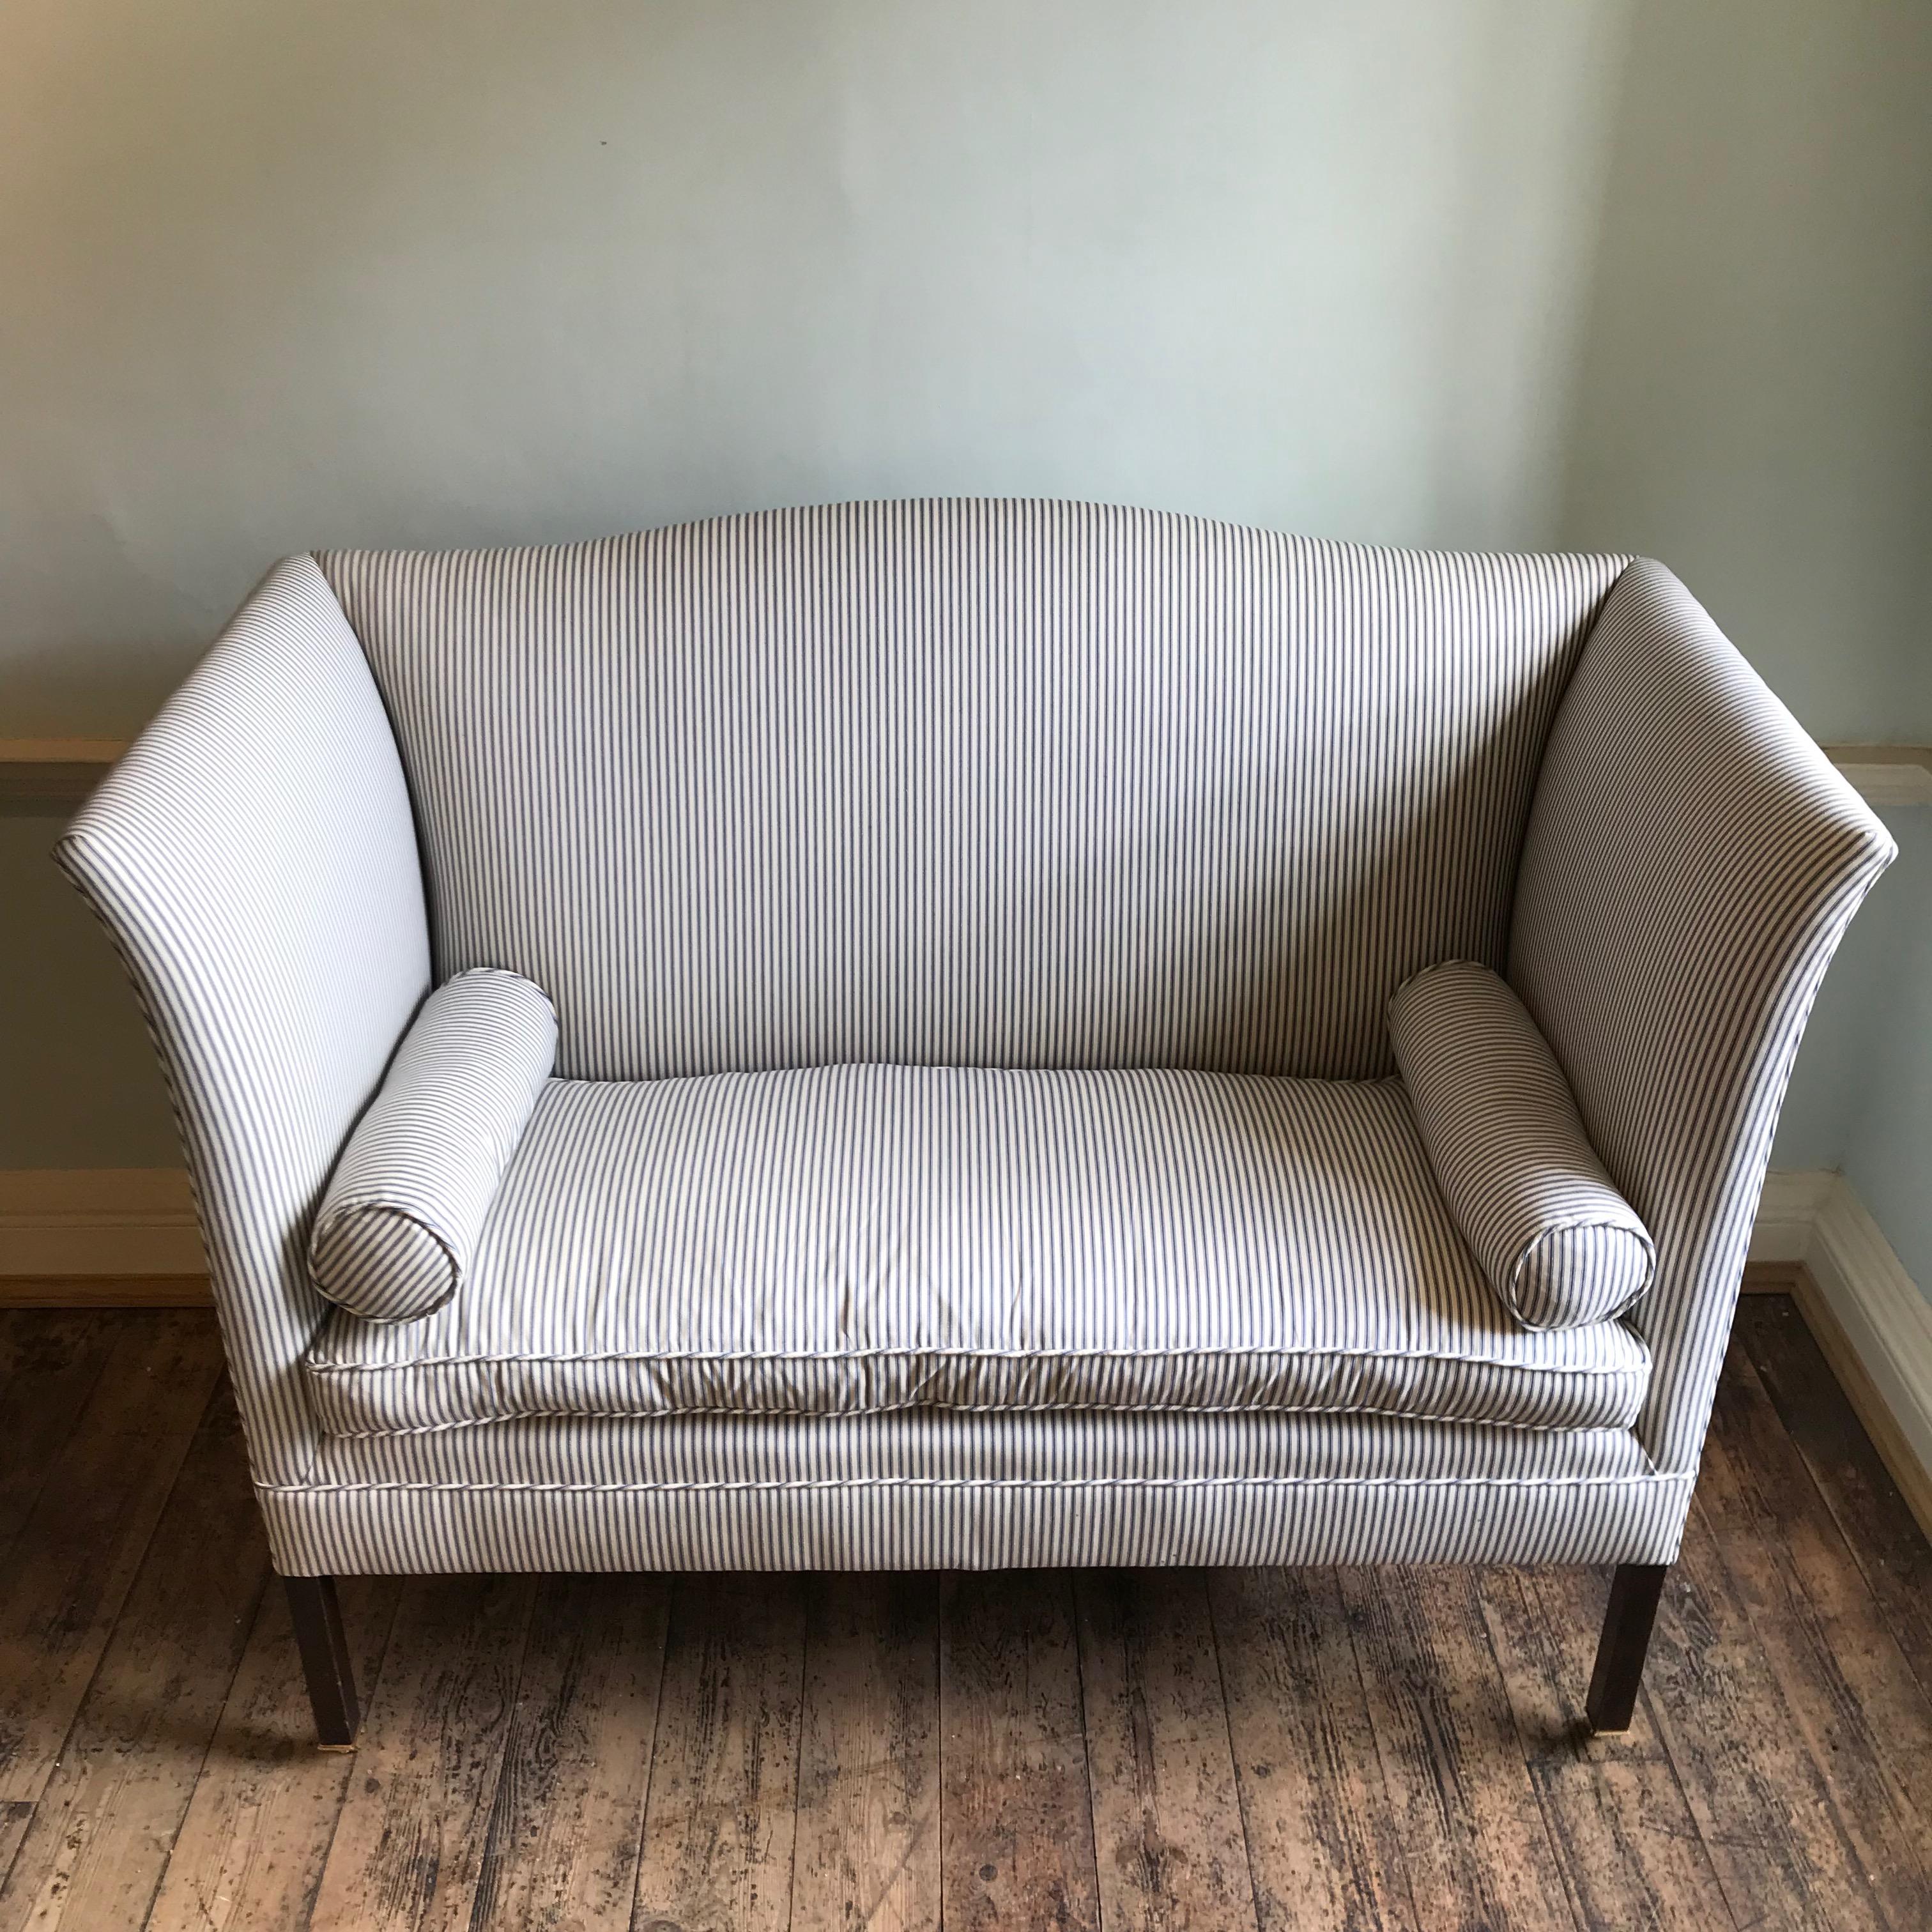 This lovely sofa is now available for sale. It’s built around the original Edwardian period frame, adapted and redesigned to give the blue print of what we now produce as The Admiral.

The frame has been completely traditionally reupholstered from